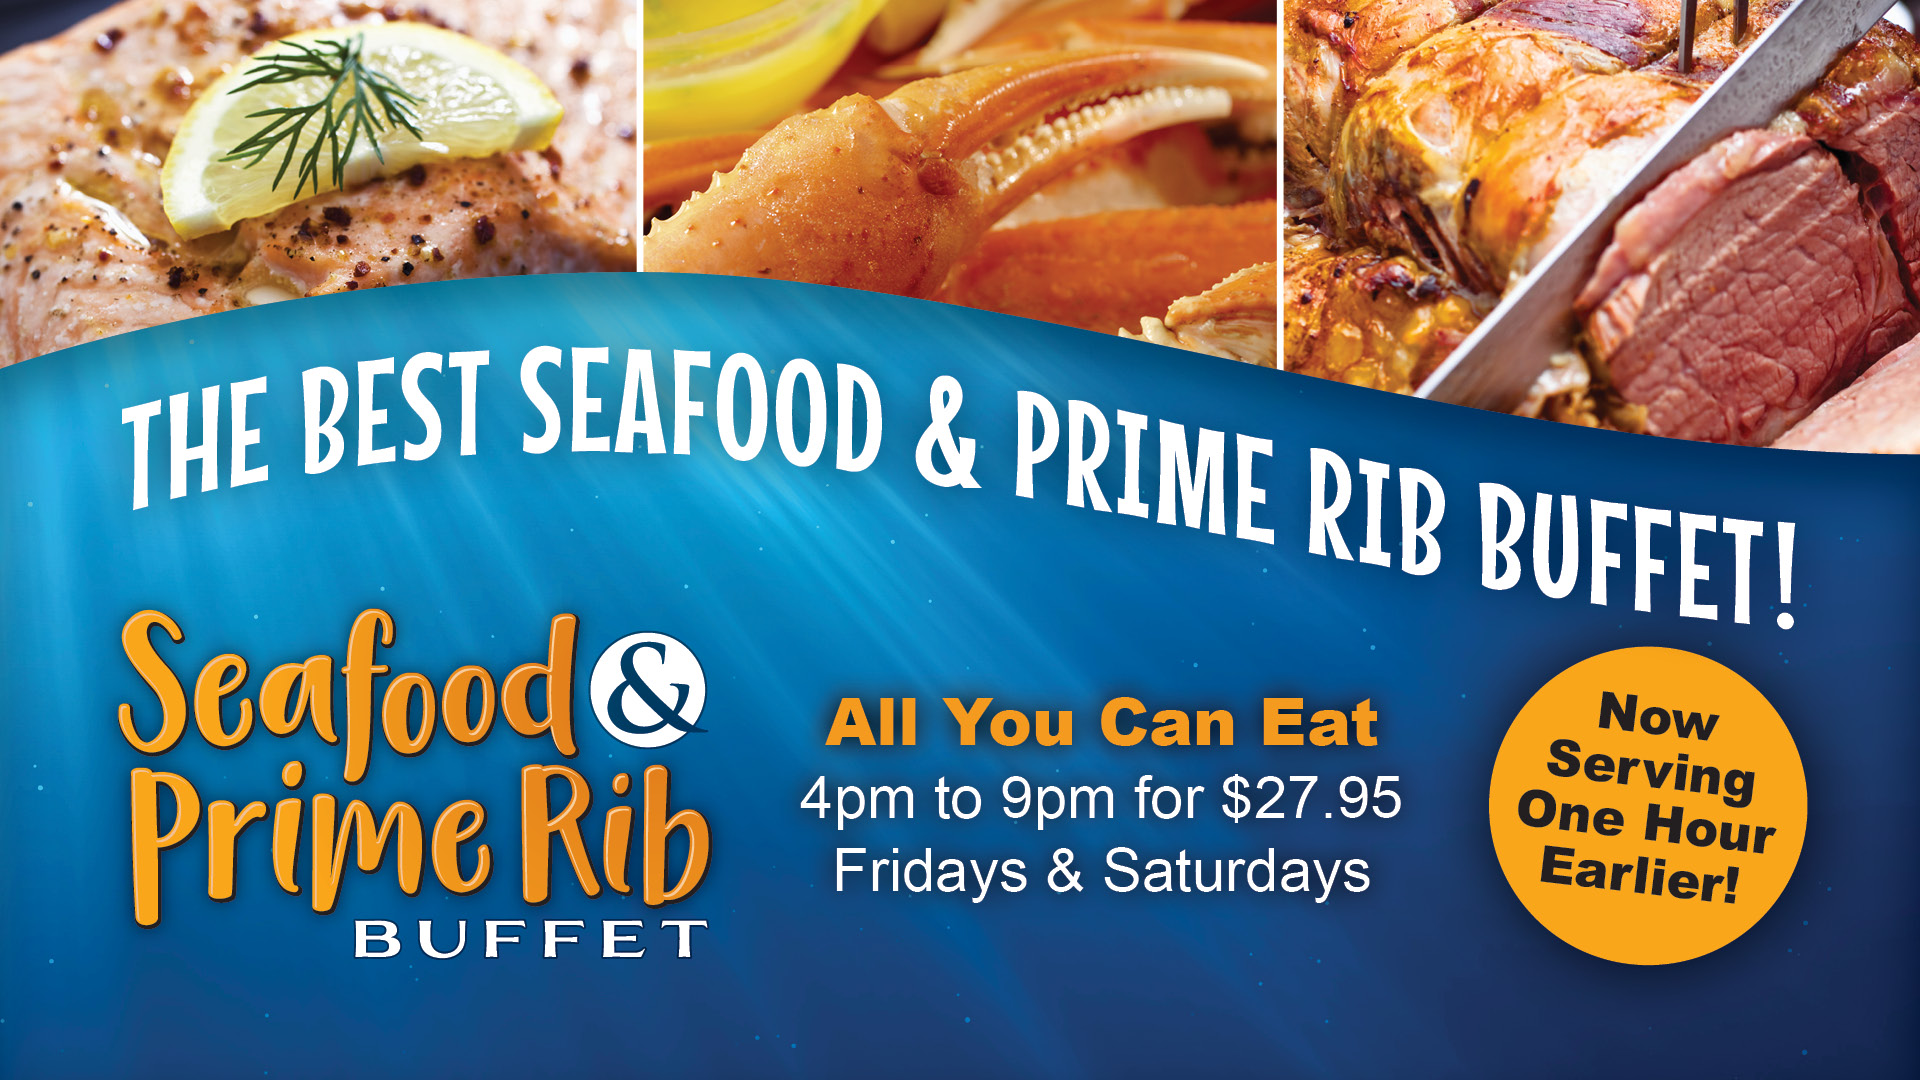 The best seafood & prime rib buffet! All you can eat 4pm to 9pm for $27.96. Fridays & Saturdays. Now serving one hour earlier!